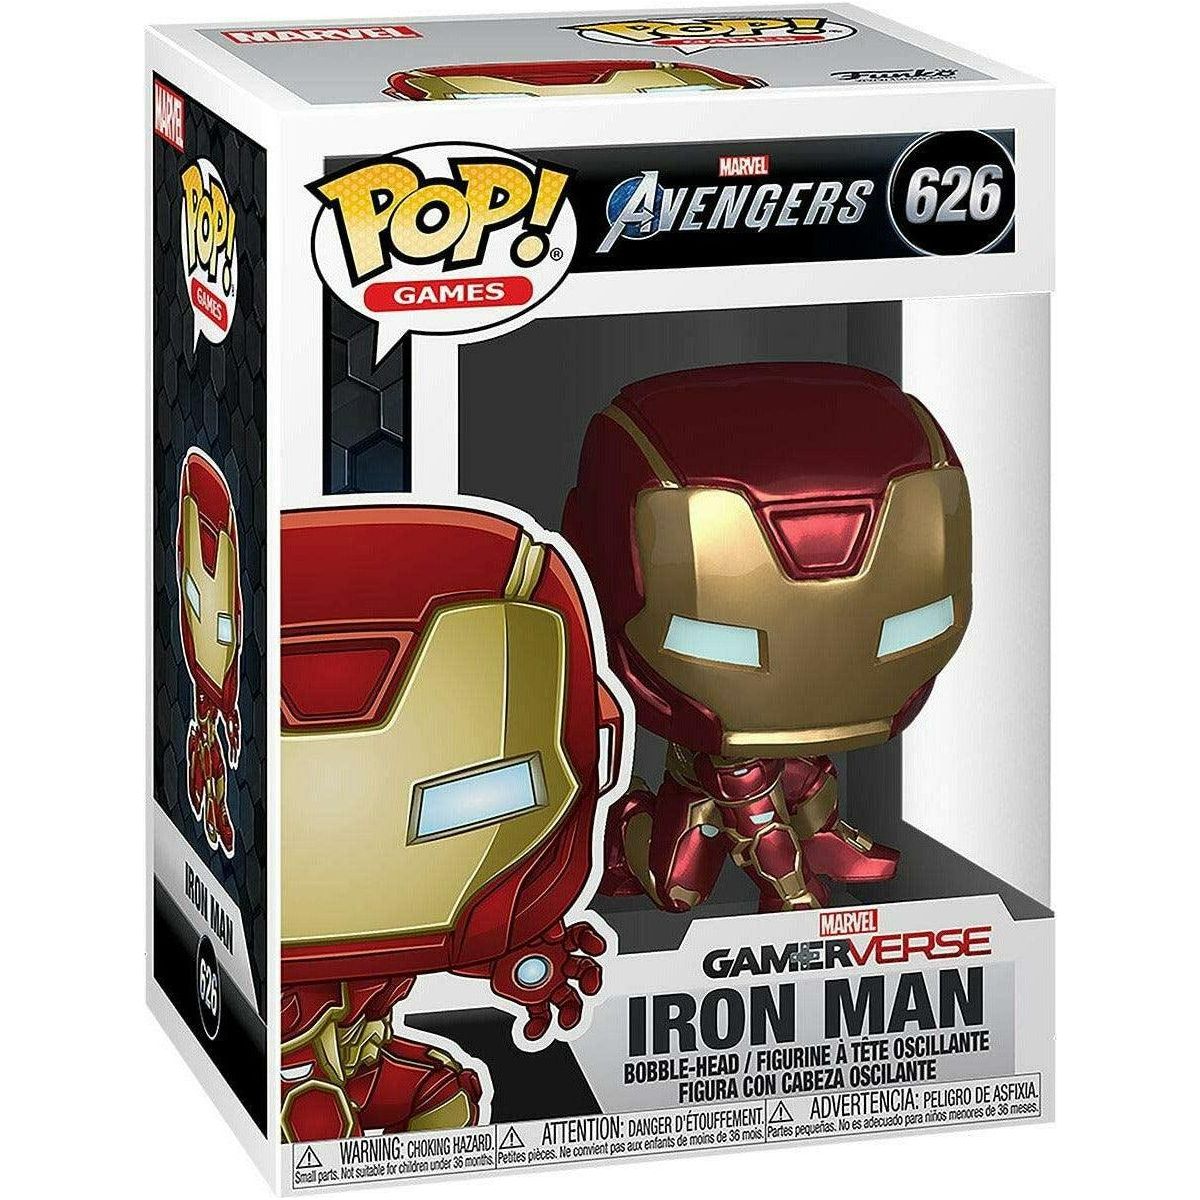 Funko Pop! Marvel Avengers Game - Iron Man (Stark Tech Suit) - BumbleToys - 18+, 4+ Years, 5-7 Years, Action Figures, Avengers, Boys, Characters, Funko, Iron man, Pre-Order